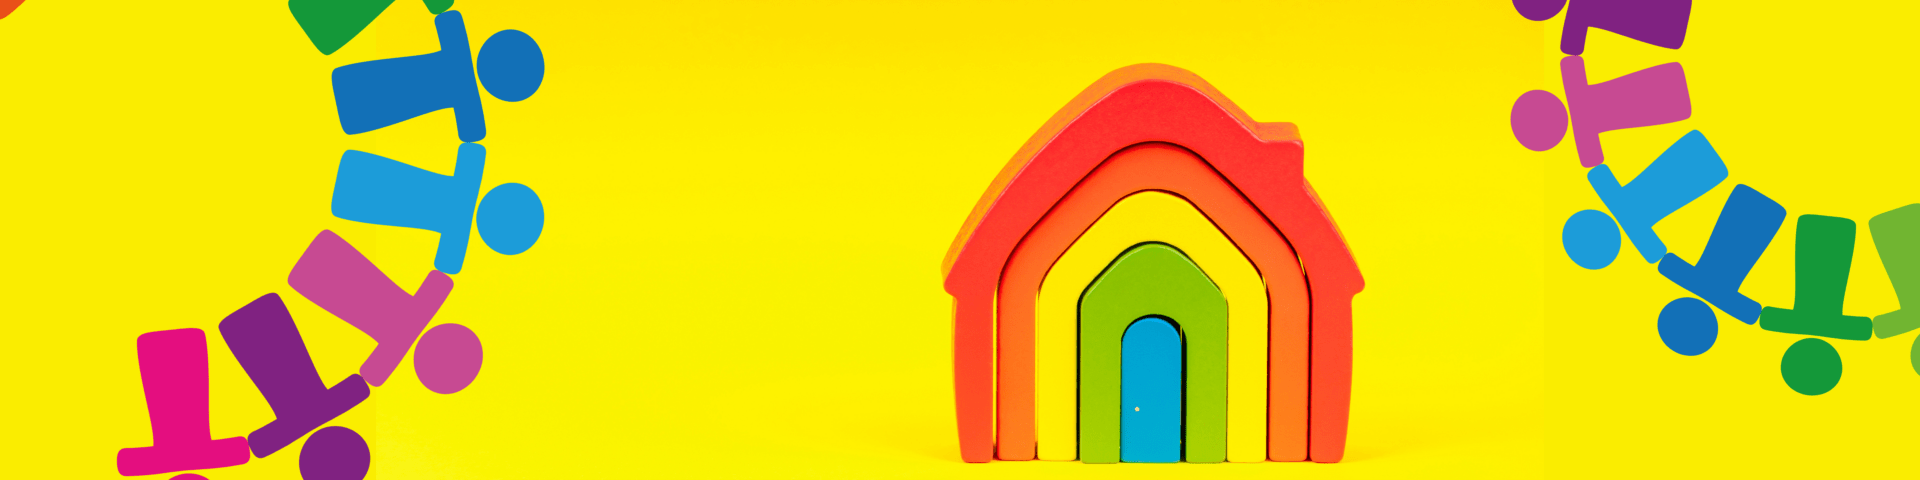 Yellow background with a rainbow wooden house